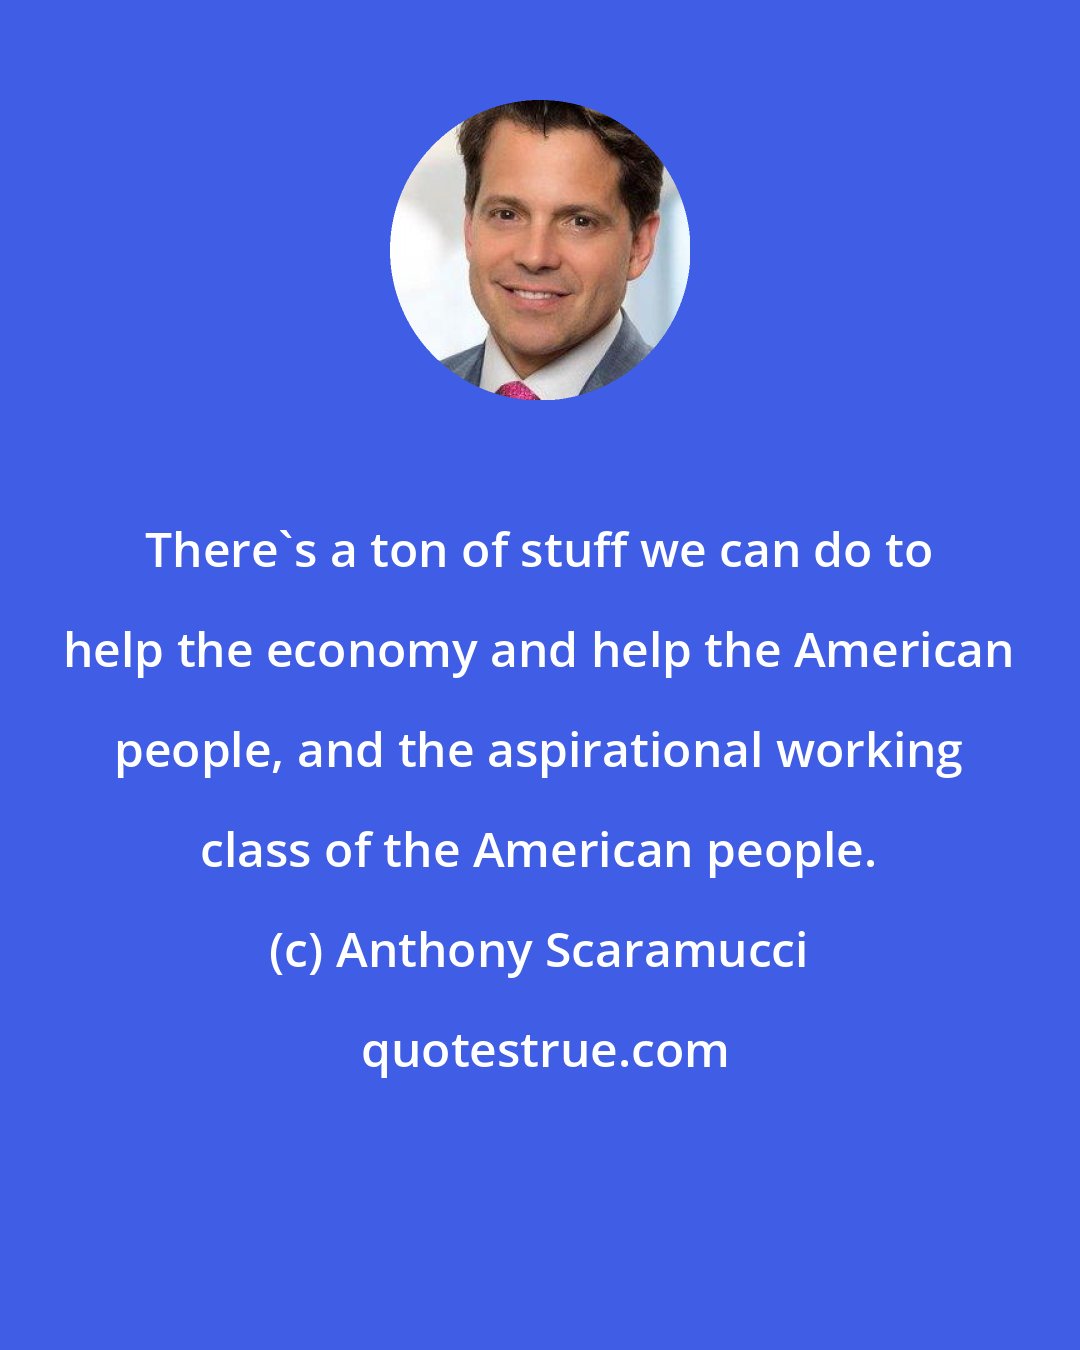 Anthony Scaramucci: There's a ton of stuff we can do to help the economy and help the American people, and the aspirational working class of the American people.